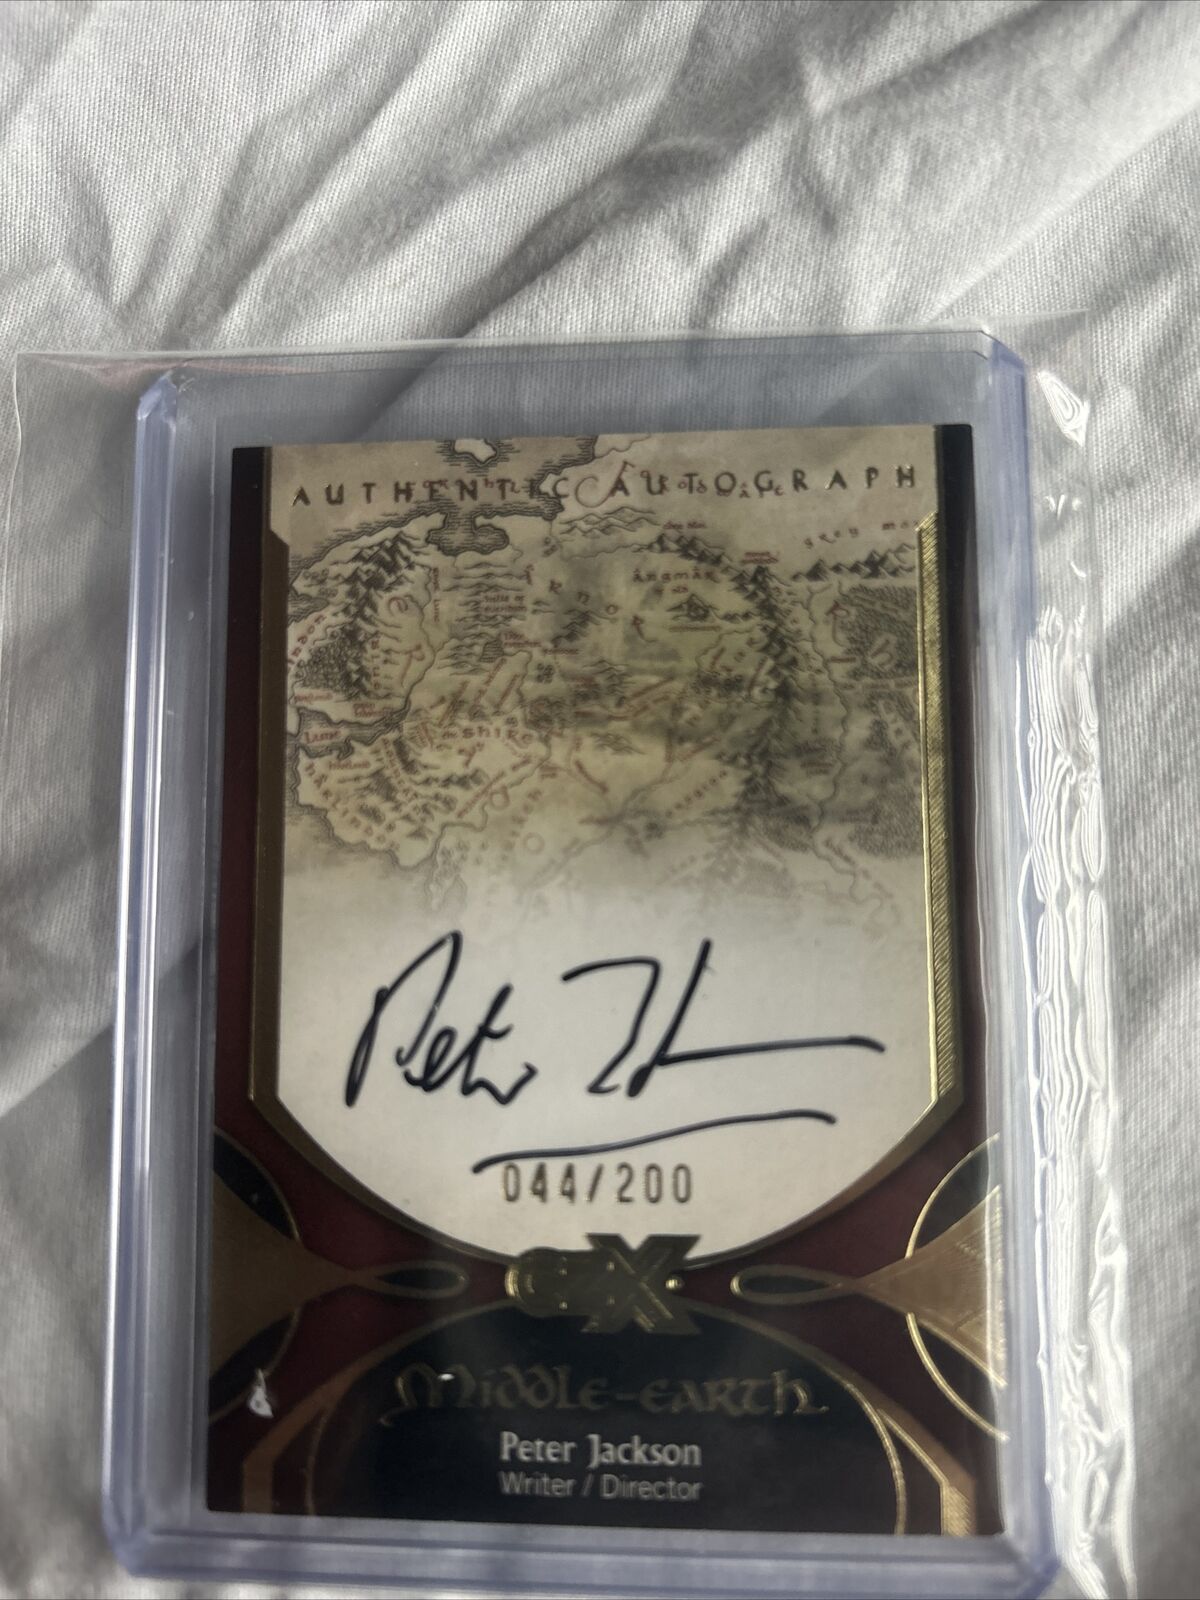 2022 CZX Middle Earth Autograph Card Peter Jackson Director 044/200